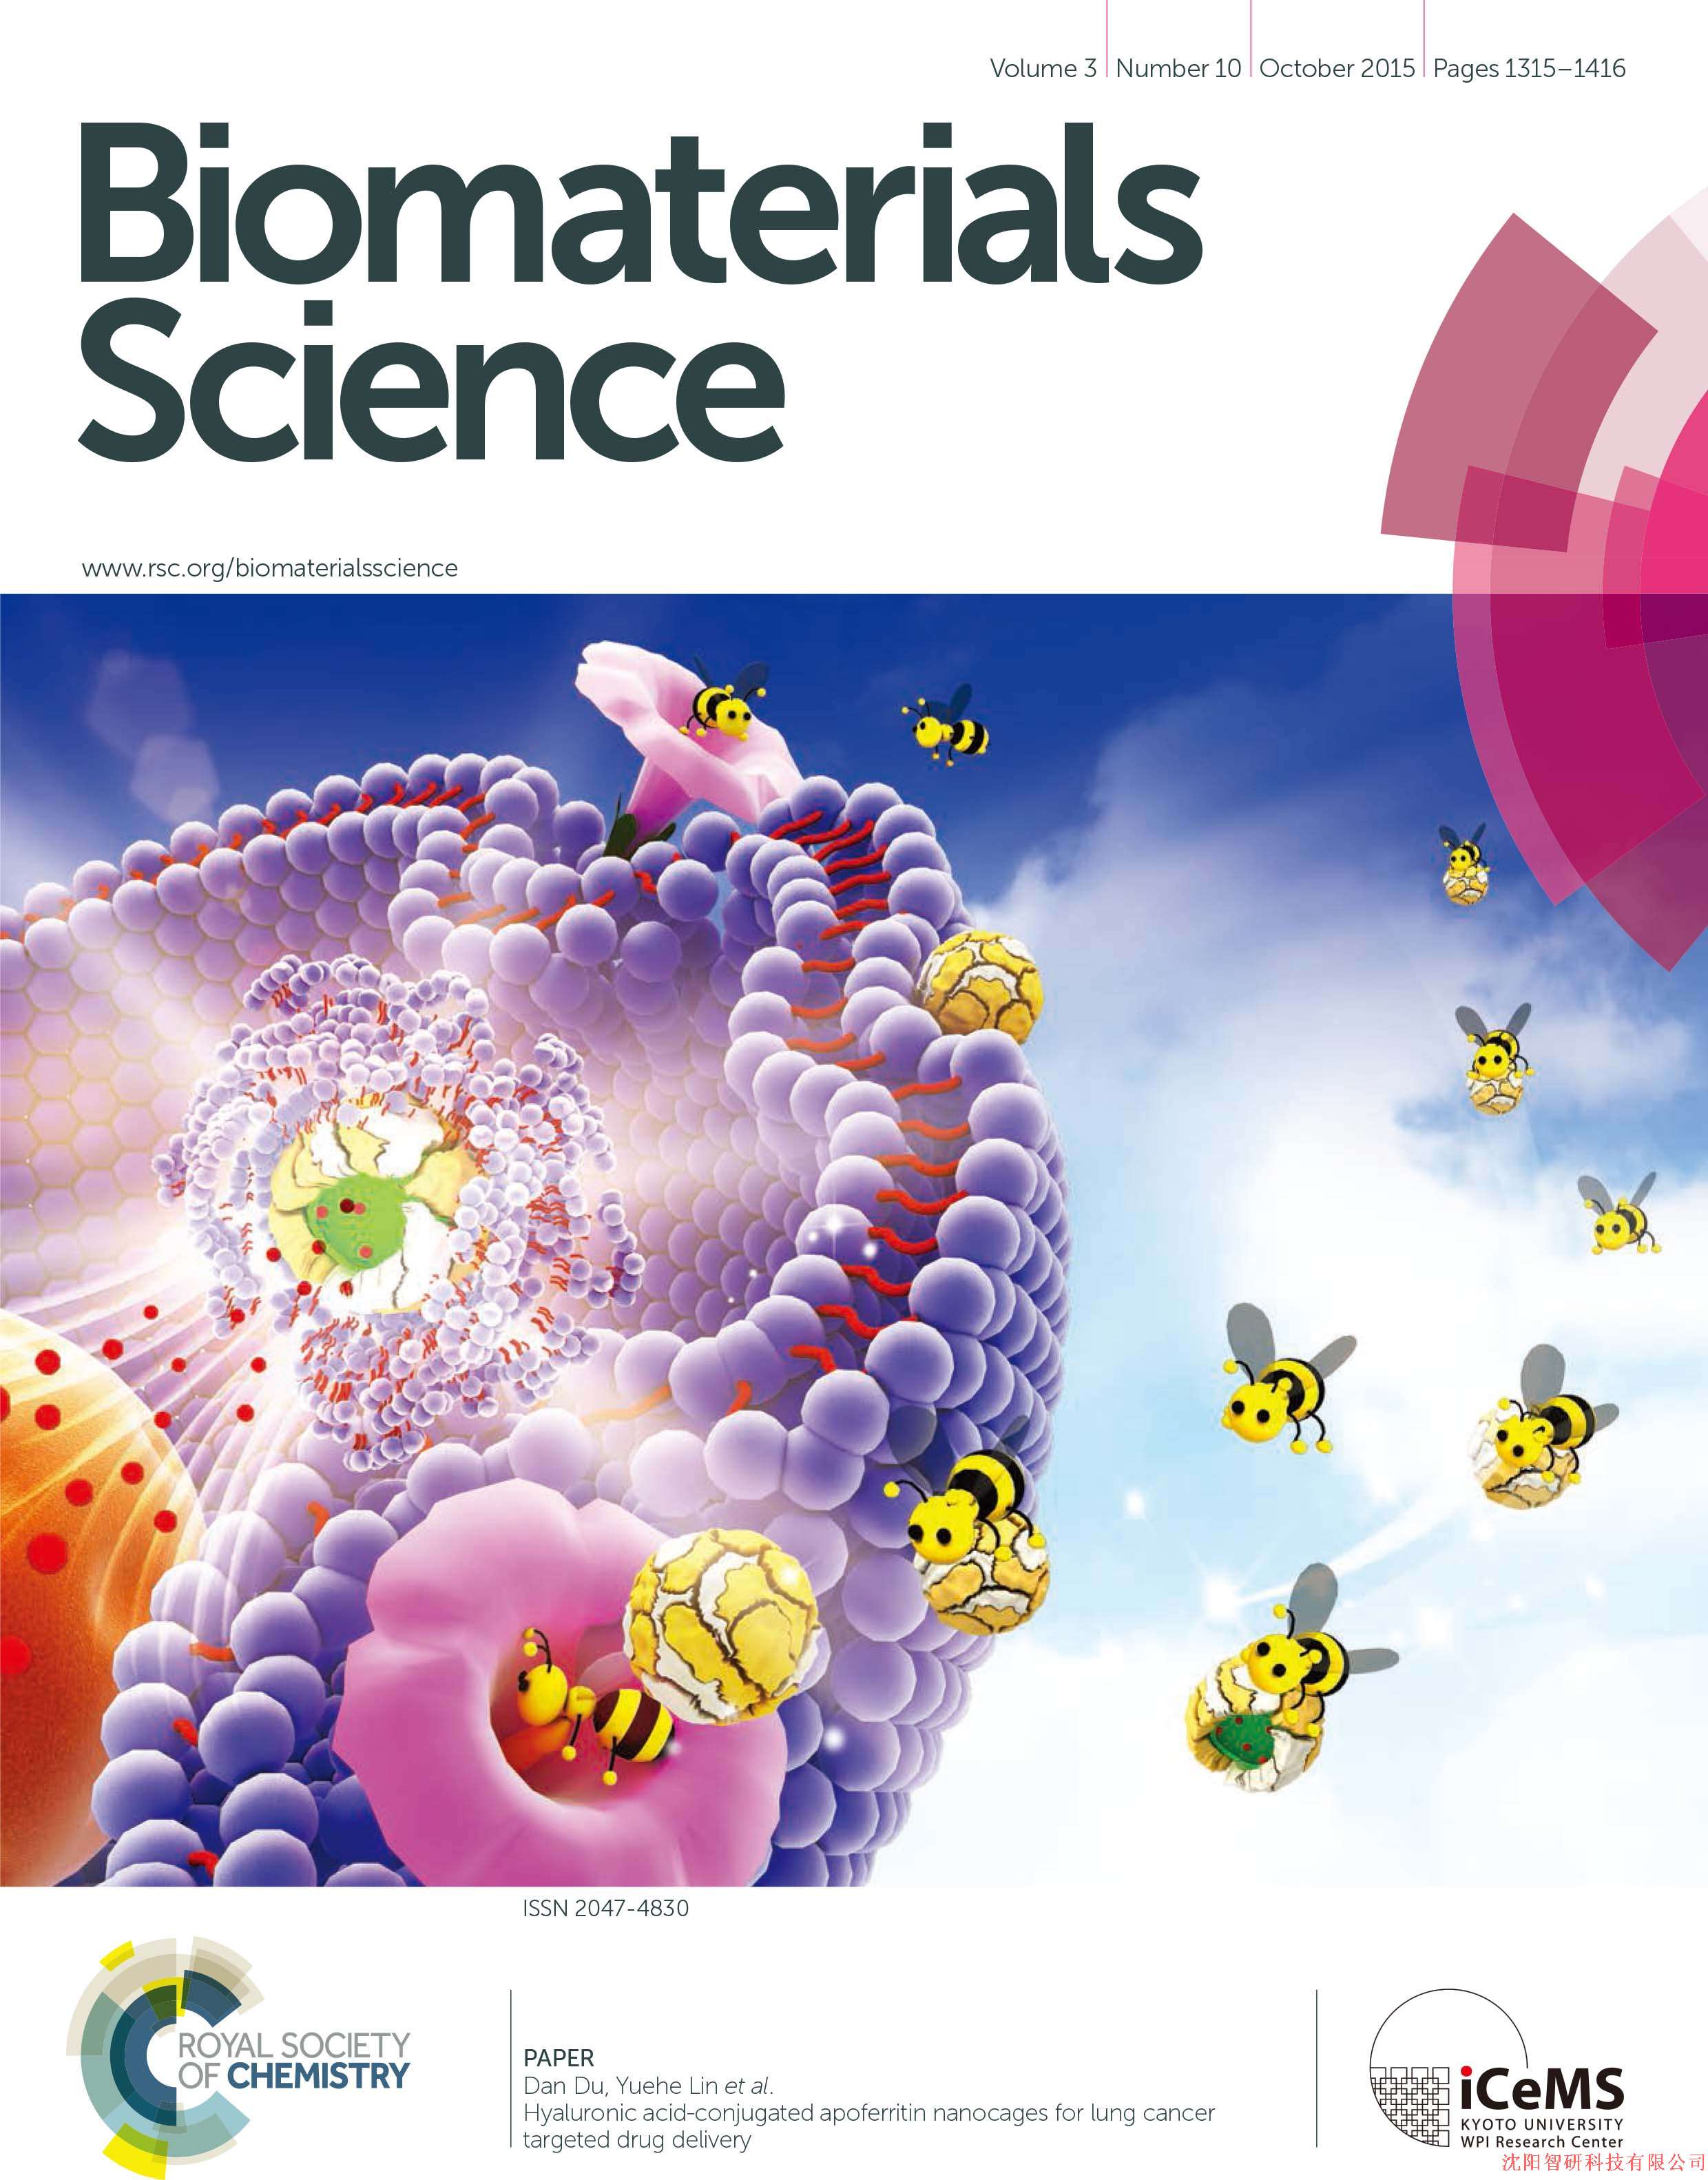 biomaterials science, 01 october 2015, issue 10, page 1315 to